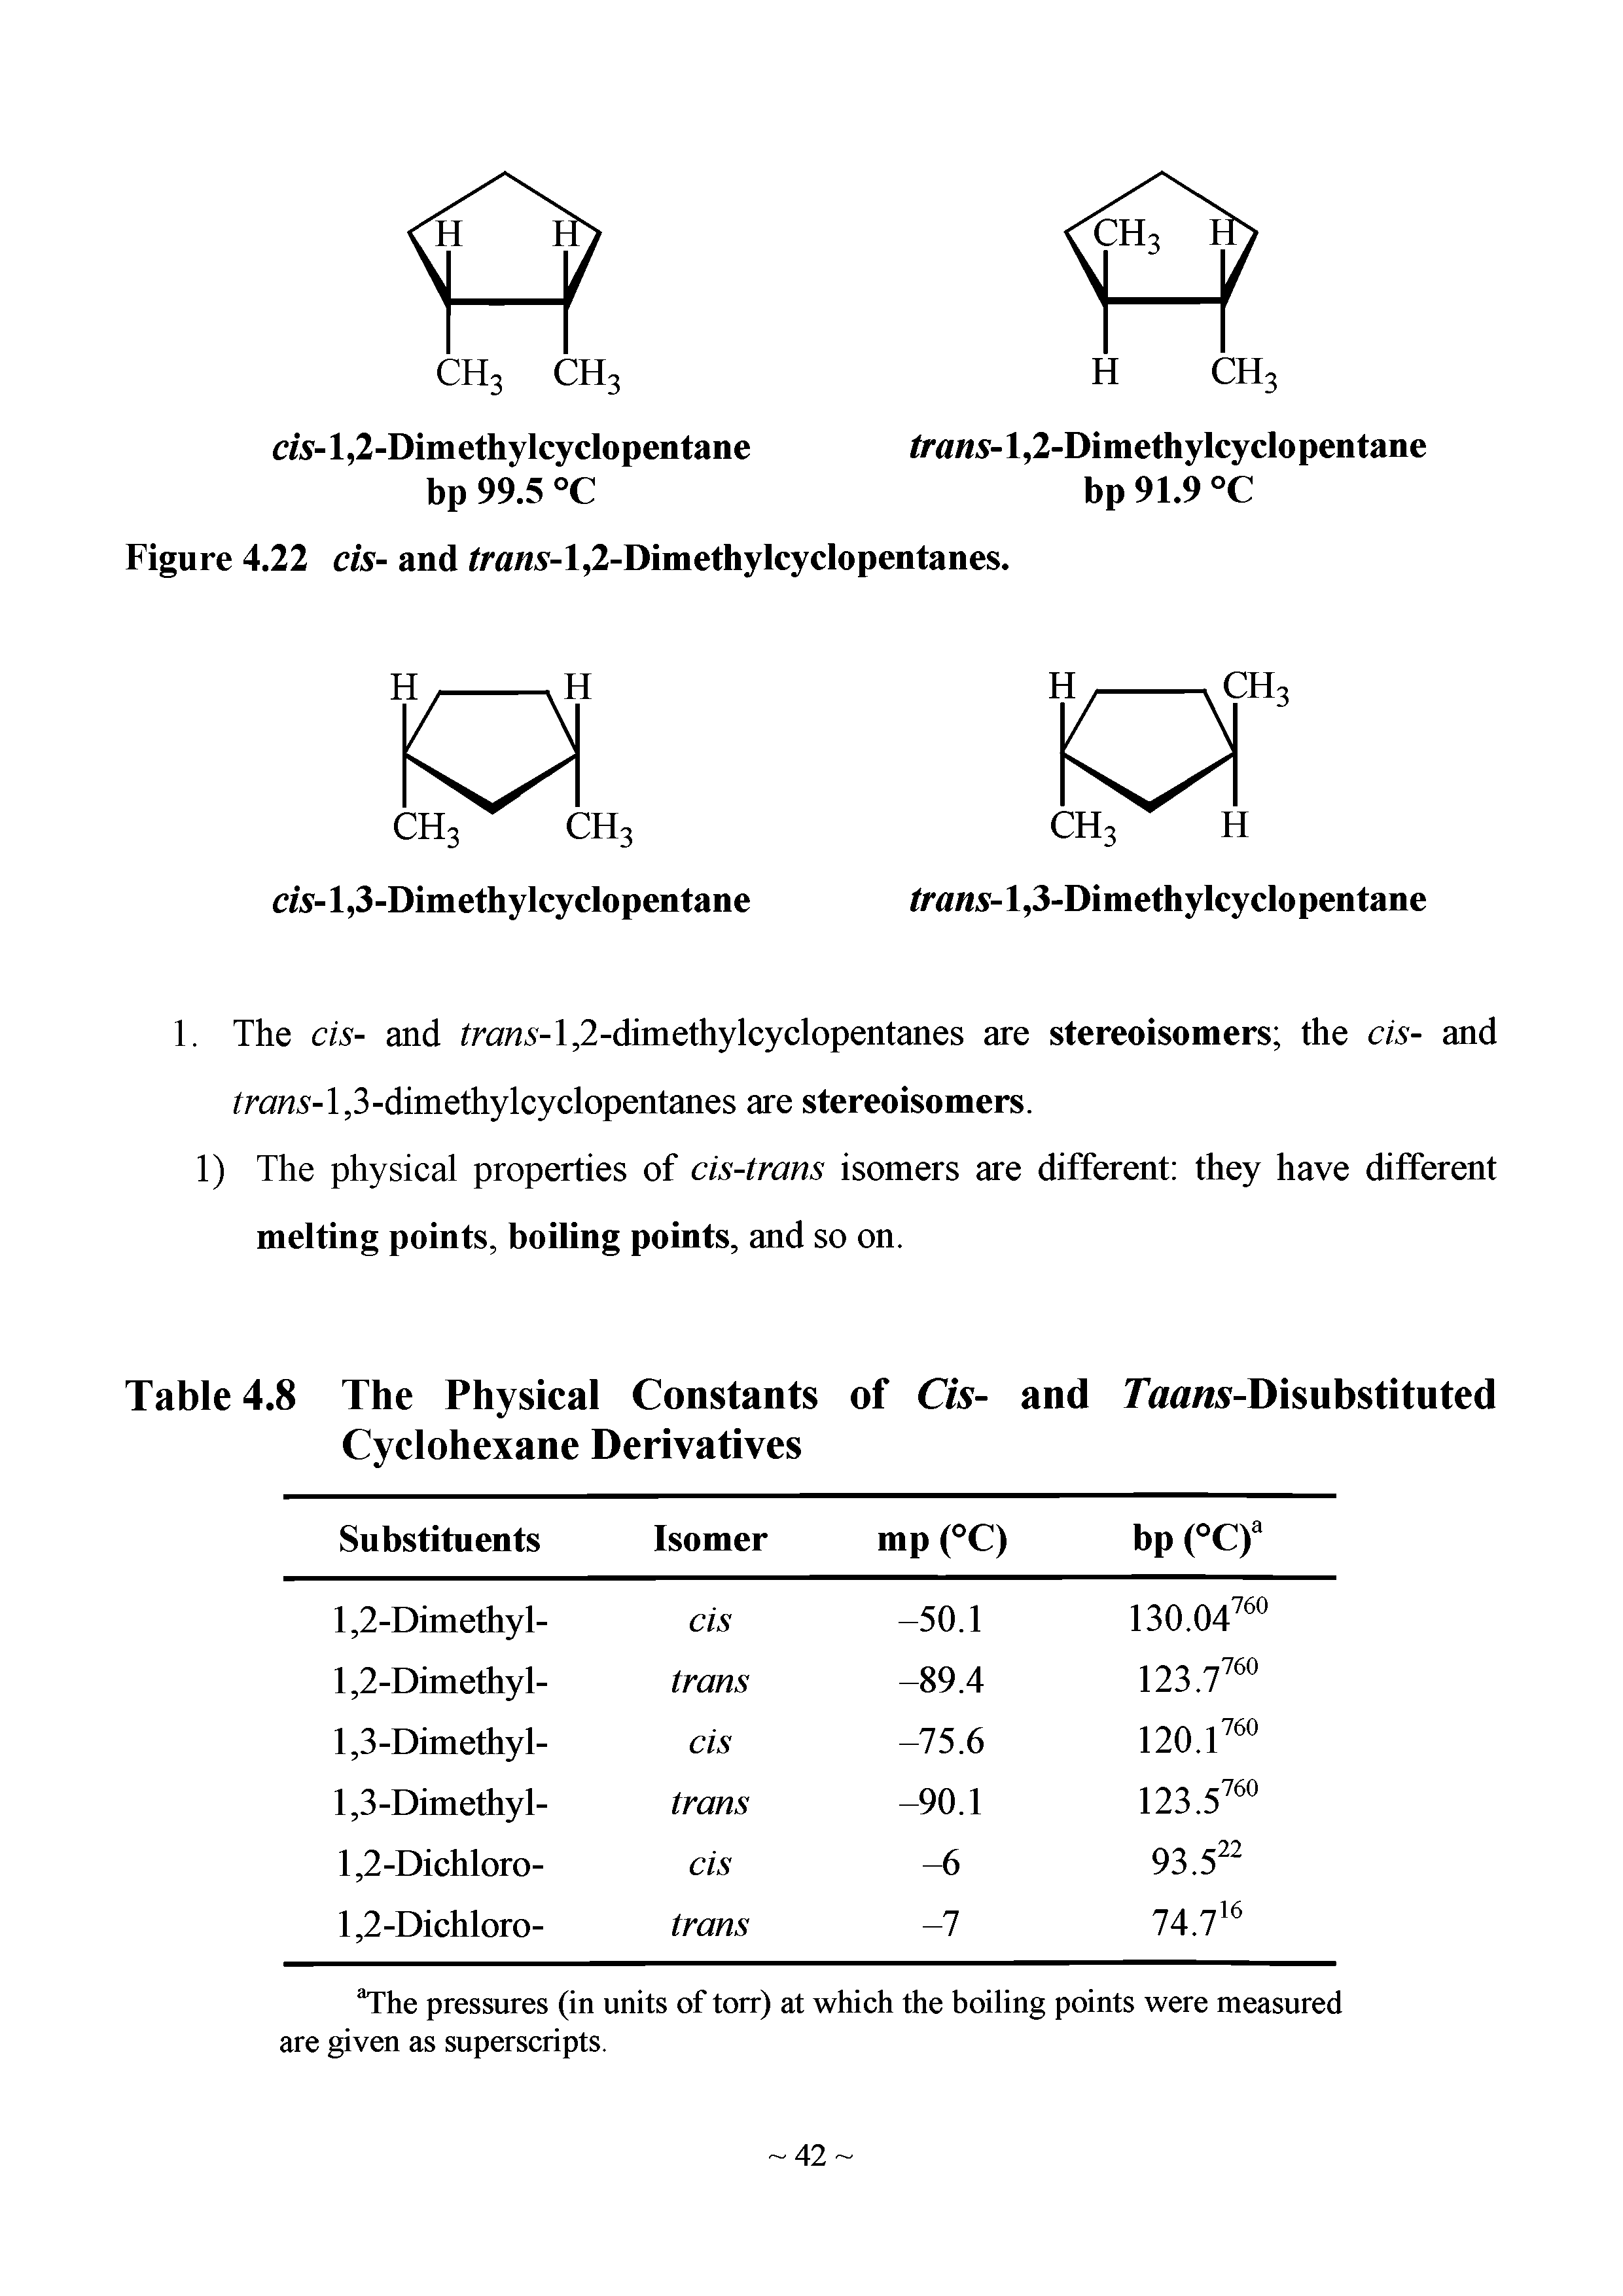 Table 4.8 The Physical Constants of Cis- and Ttwmx-Disubstituted Cyclohexane Derivatives...